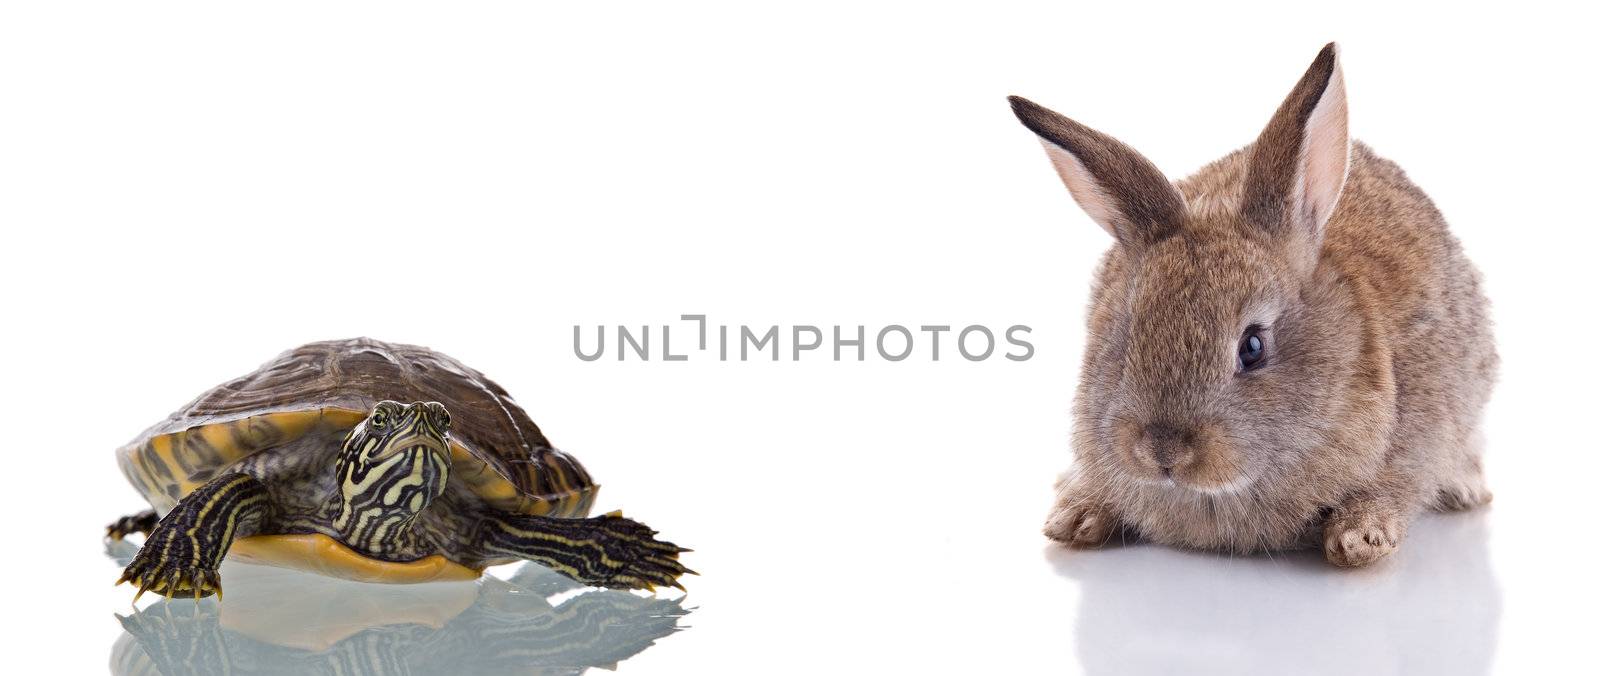 Bunny and Turtle by ajn